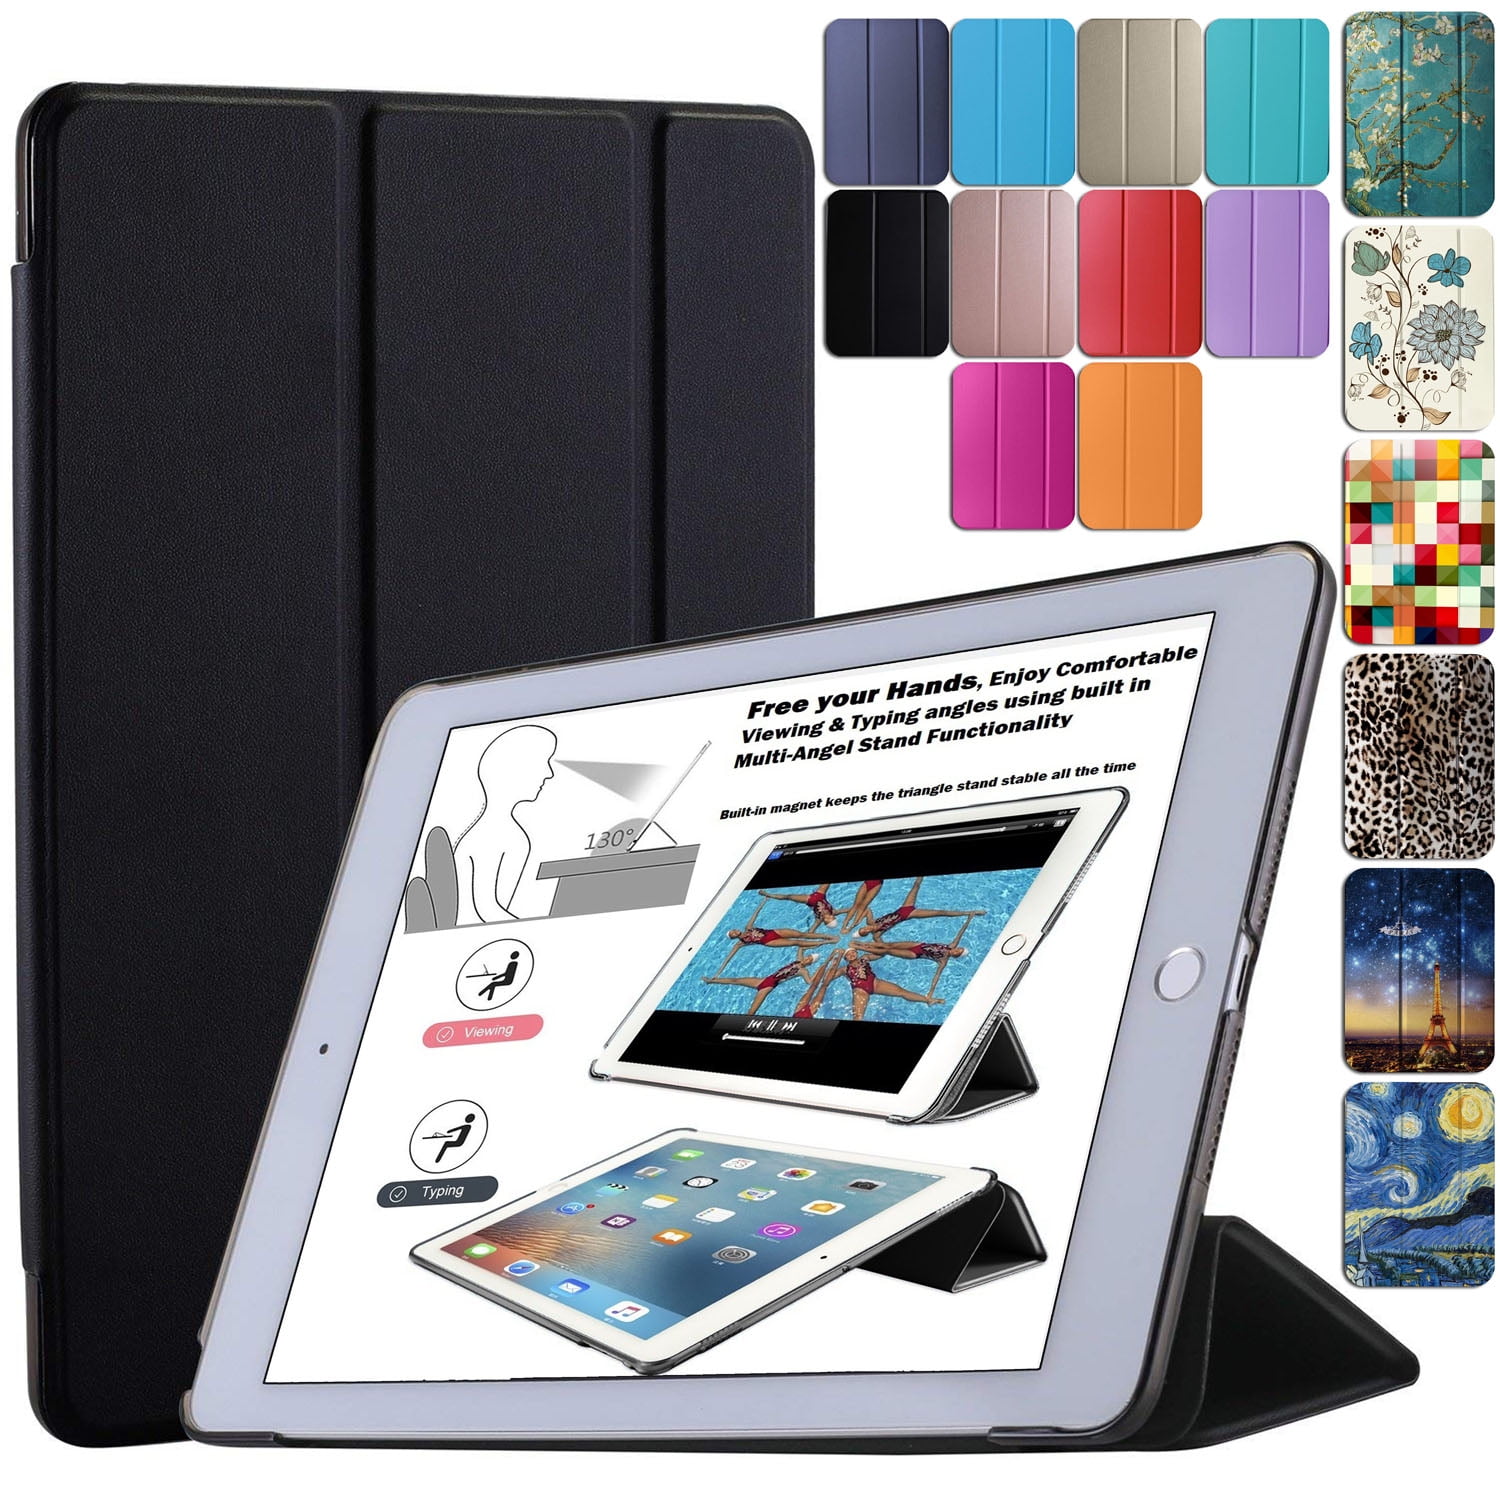 DuraSafe Cases For iPad PRO 12.9 Inch 3rd Generation 2018 ...